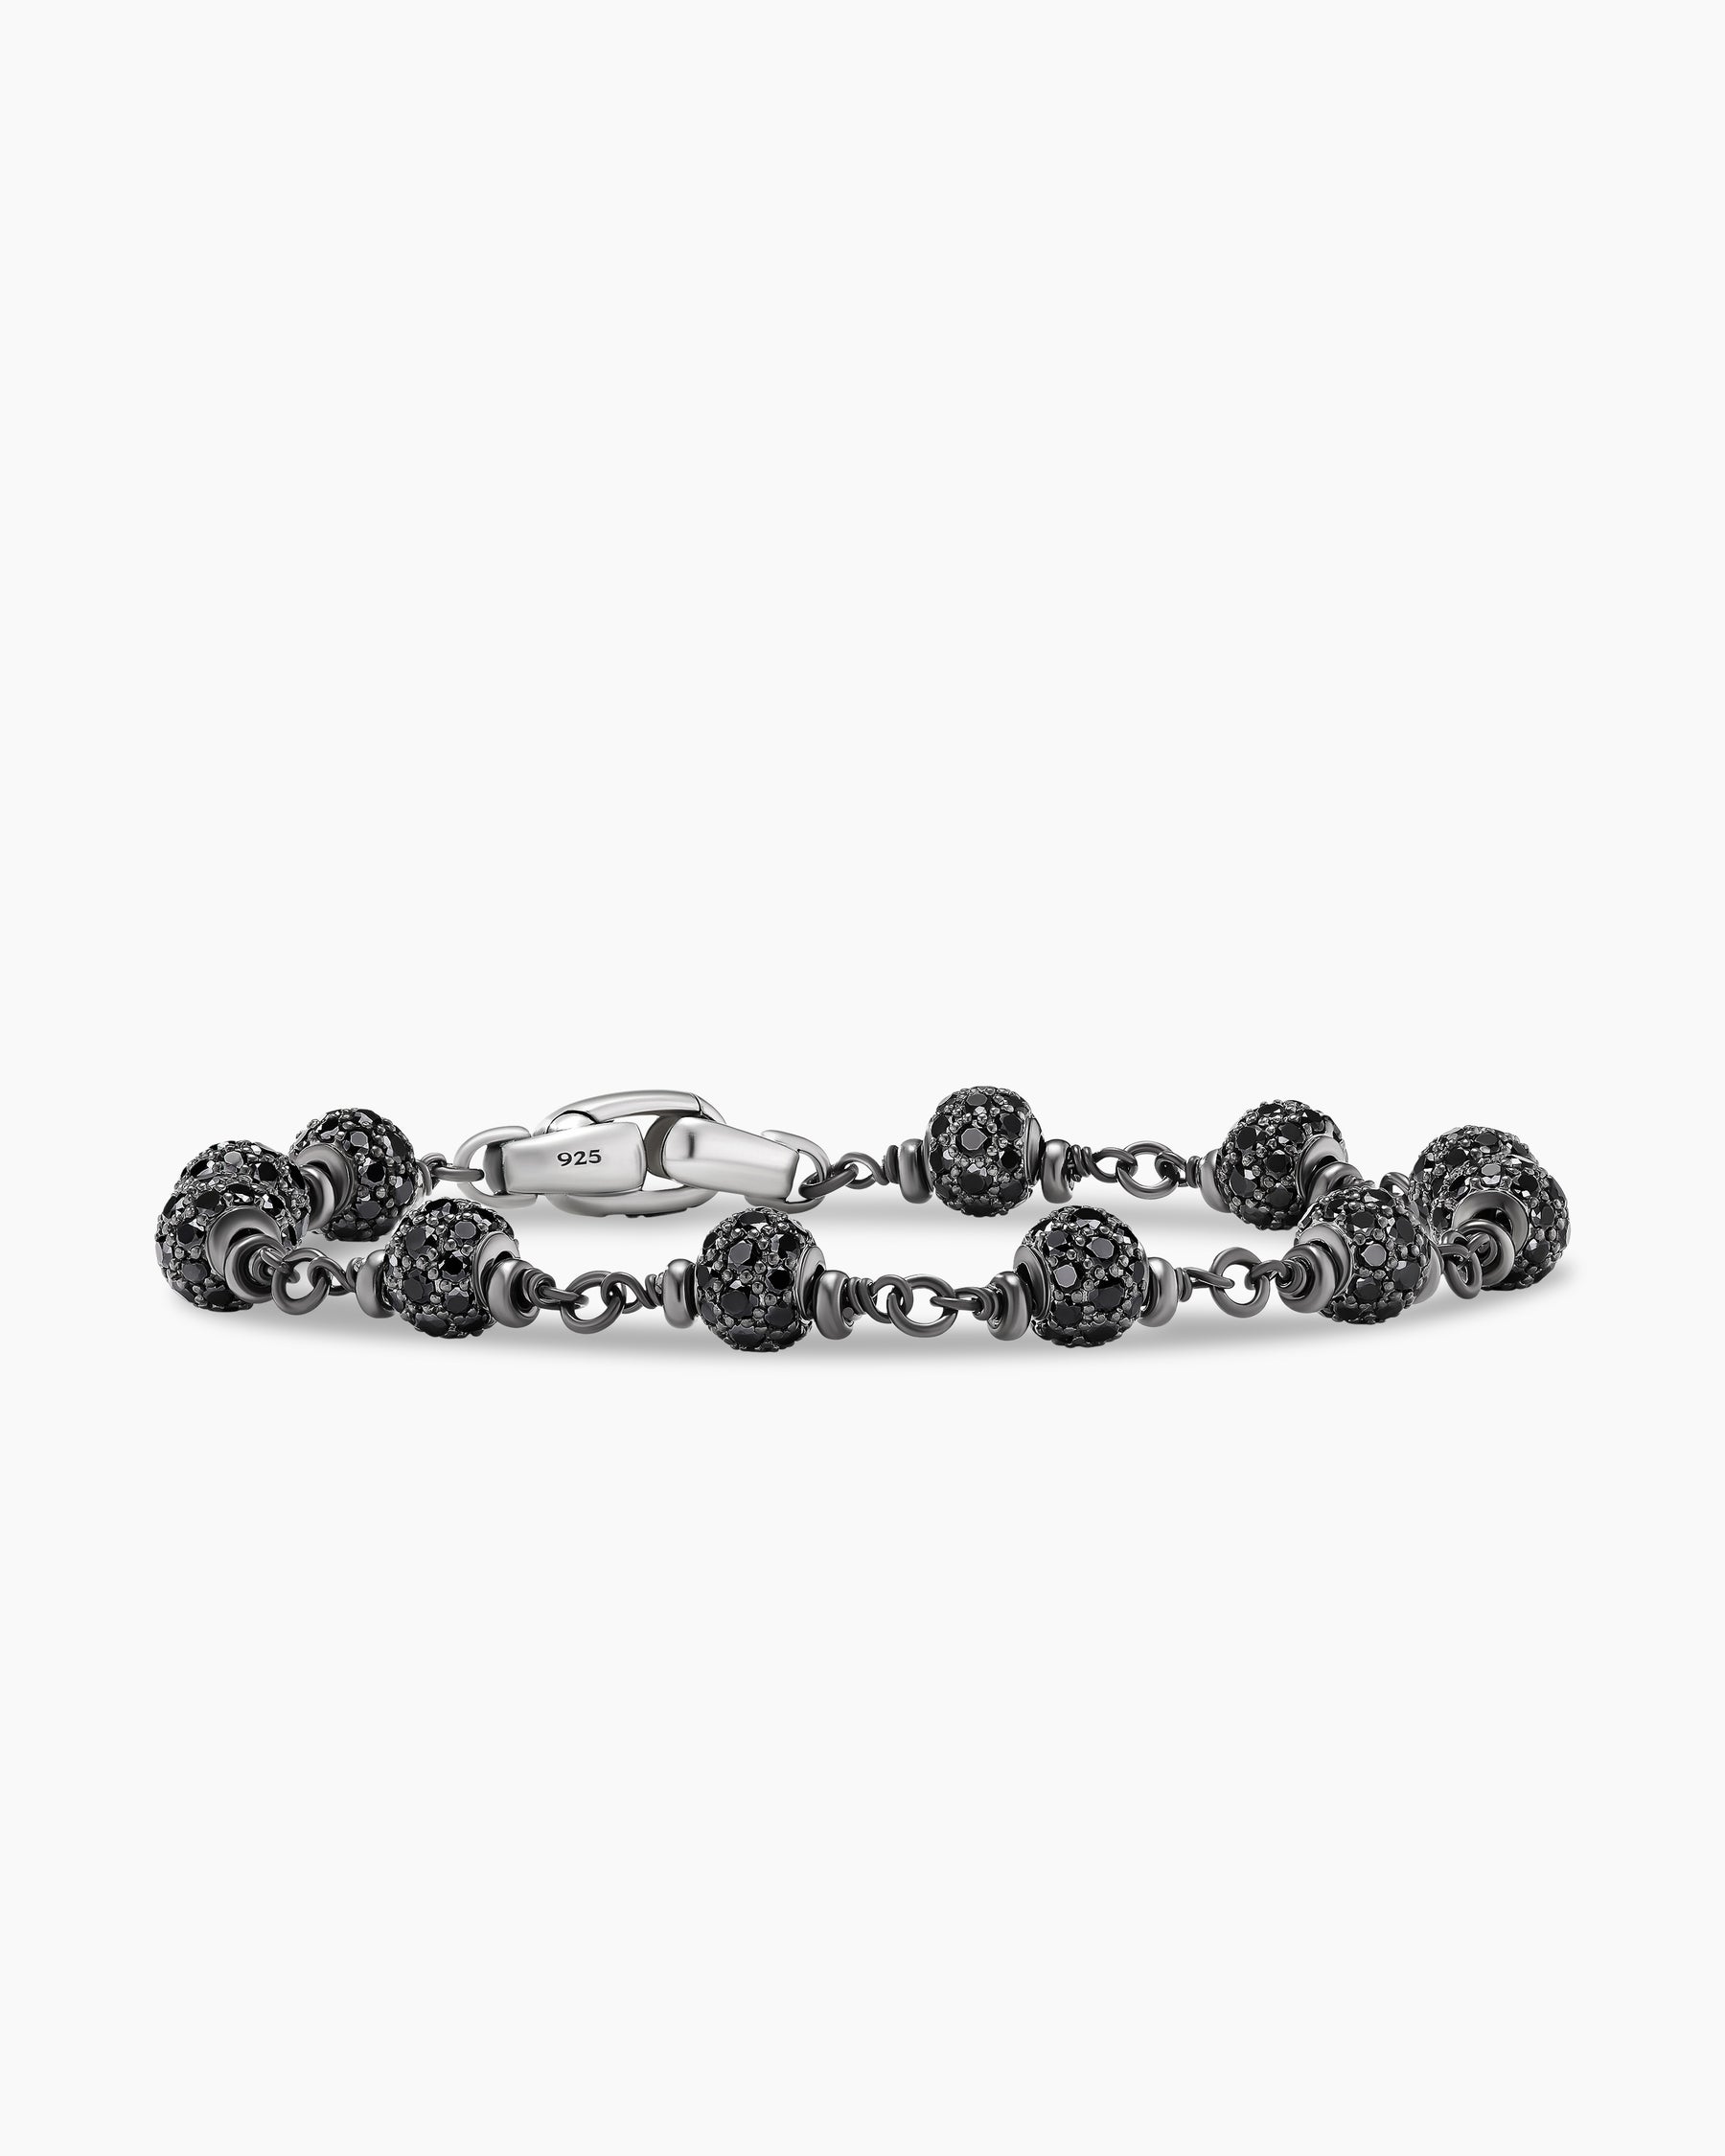 Spiritual Beads Bracelet in Sterling Silver with Pavé Accent, 8mm